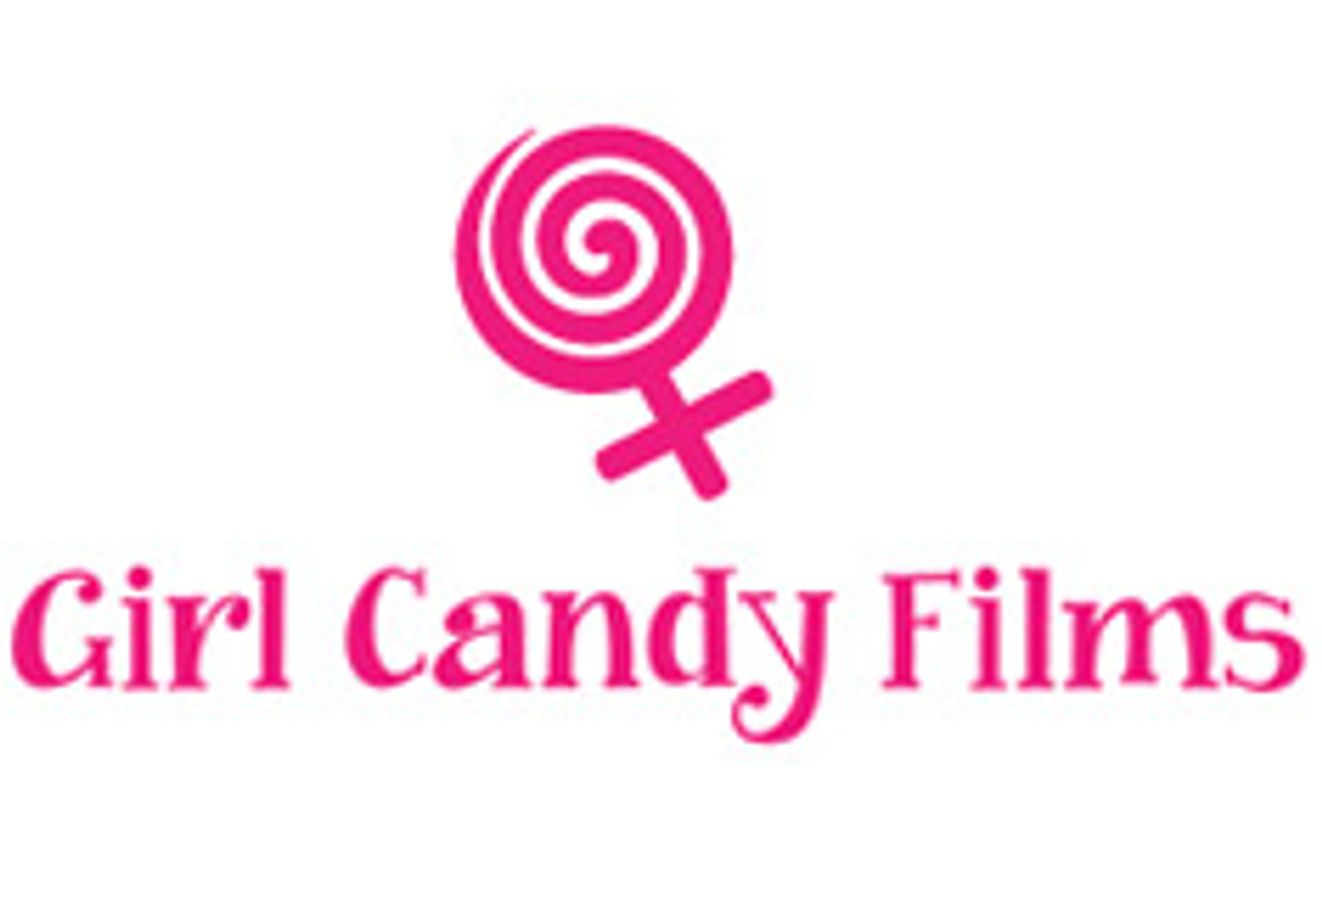 Girl Candy Films